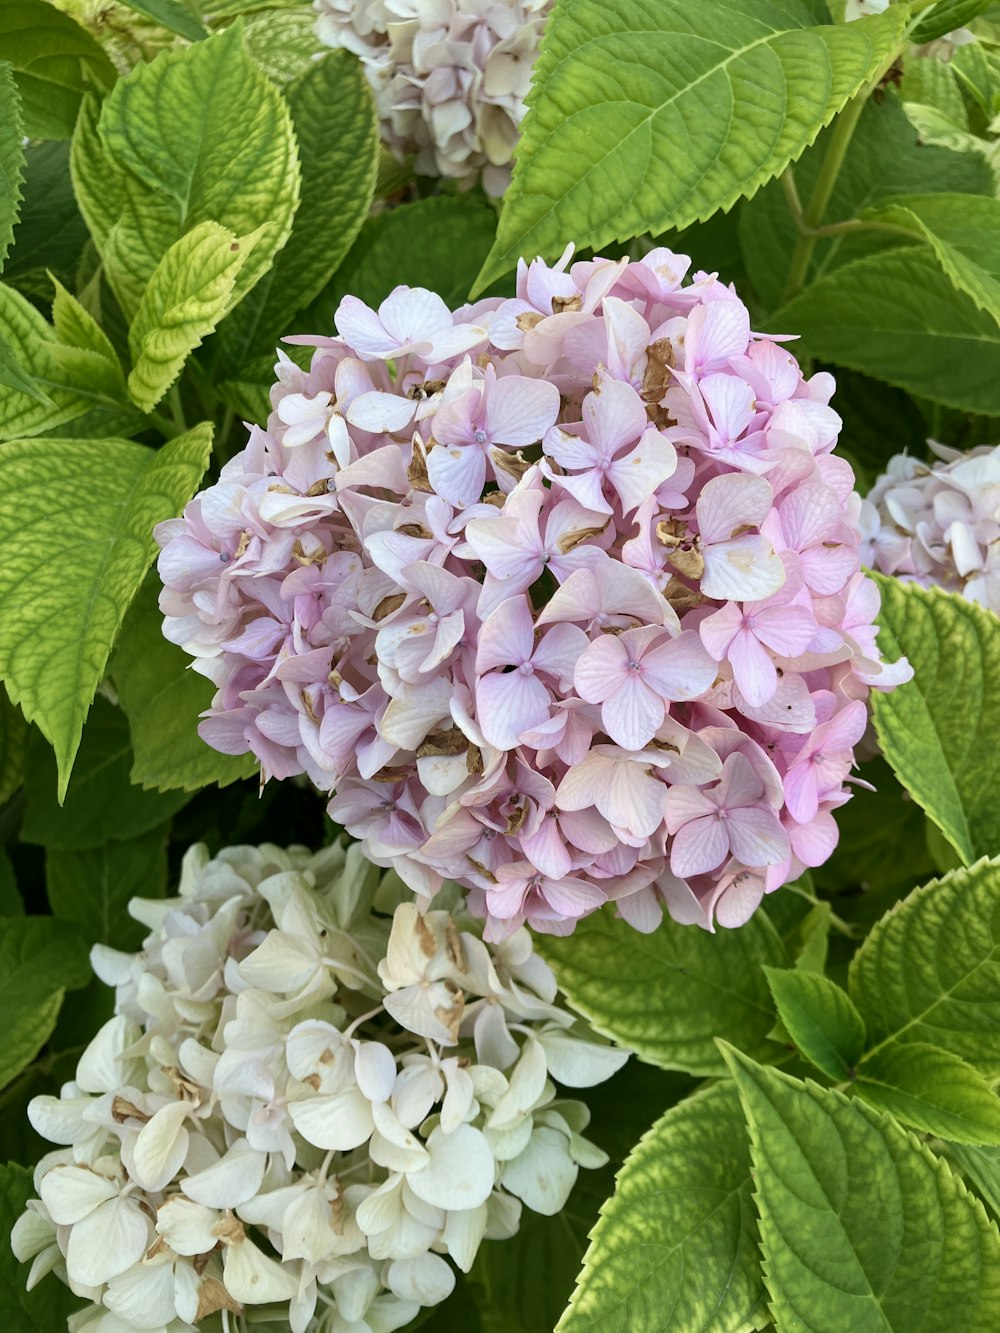 a cluster of pink and white flowers surrounded by green leaves